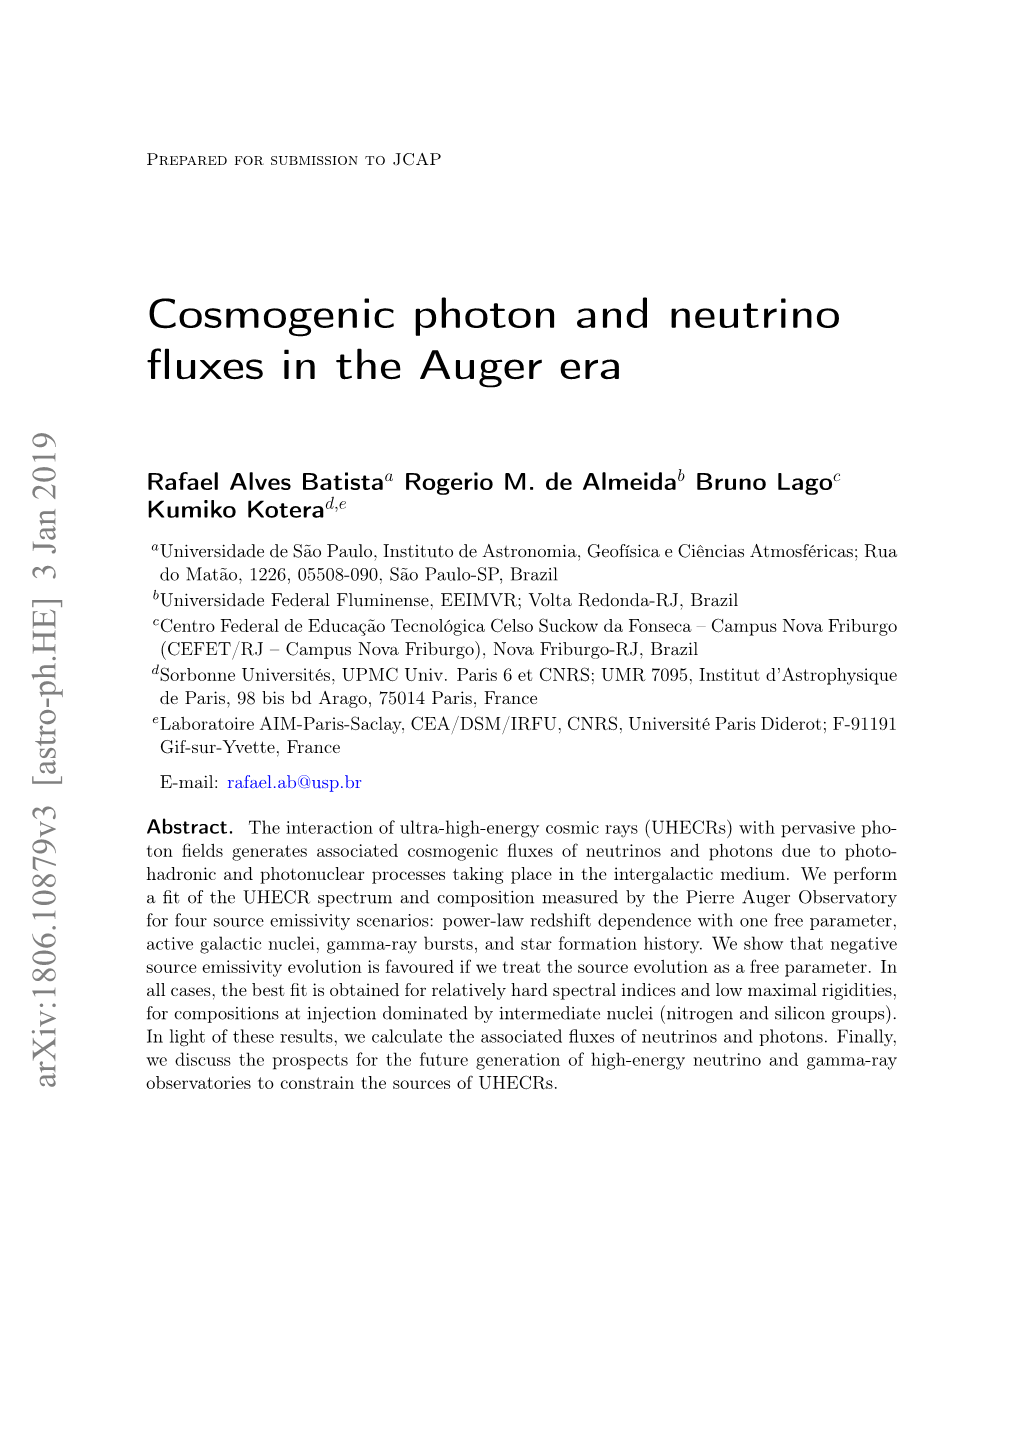 Cosmogenic Photon and Neutrino Fluxes in the Auger